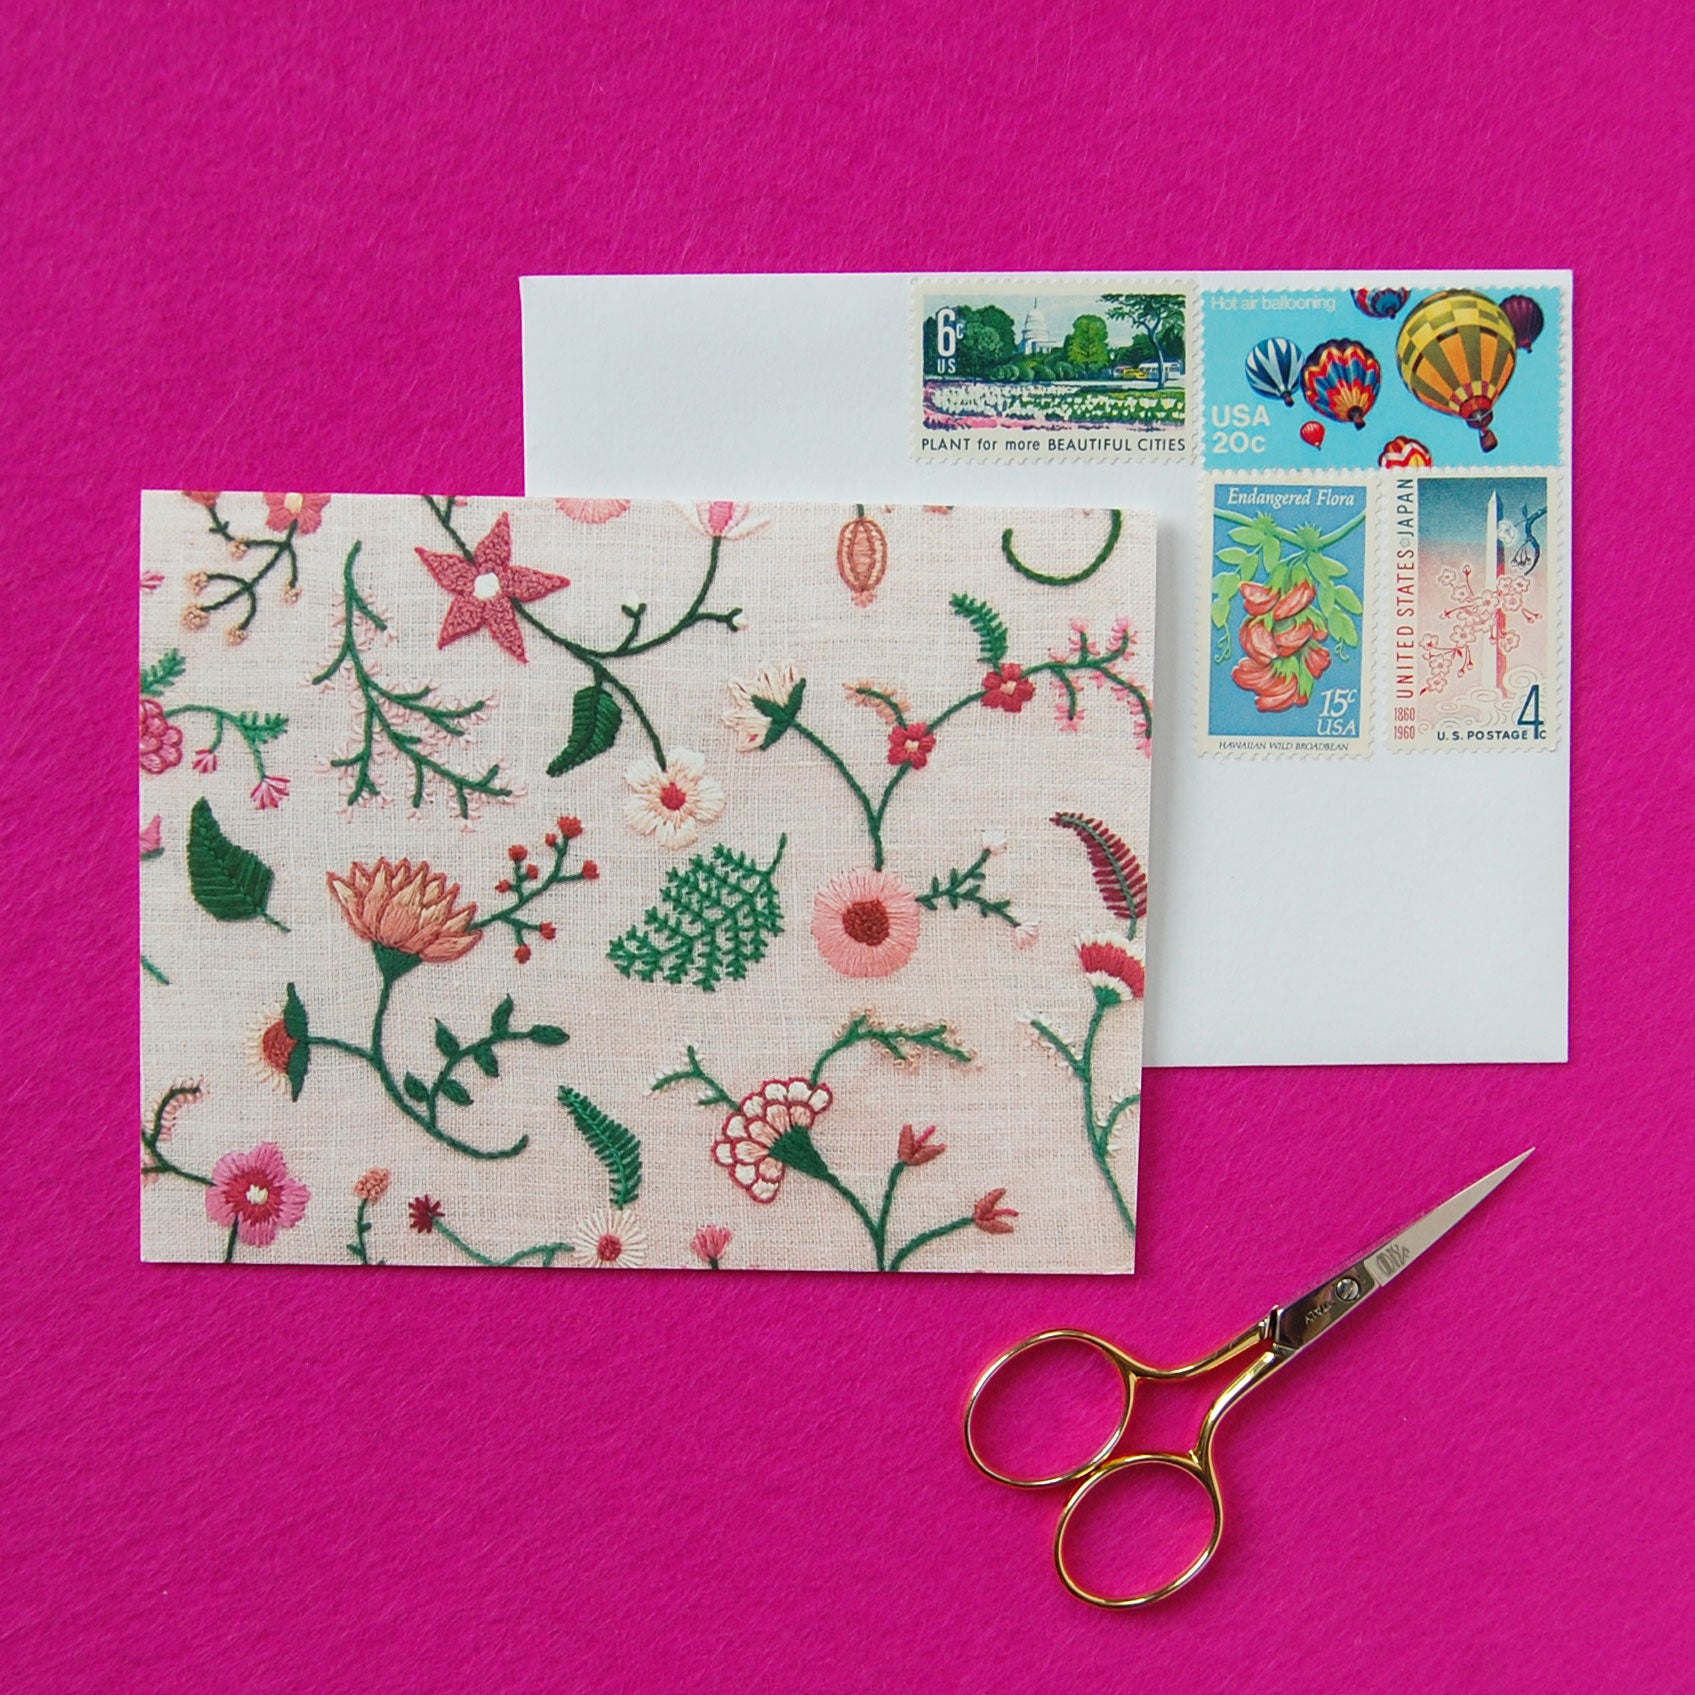 Hand Embroidered Photo Stationery - Pink Flowers on Pink